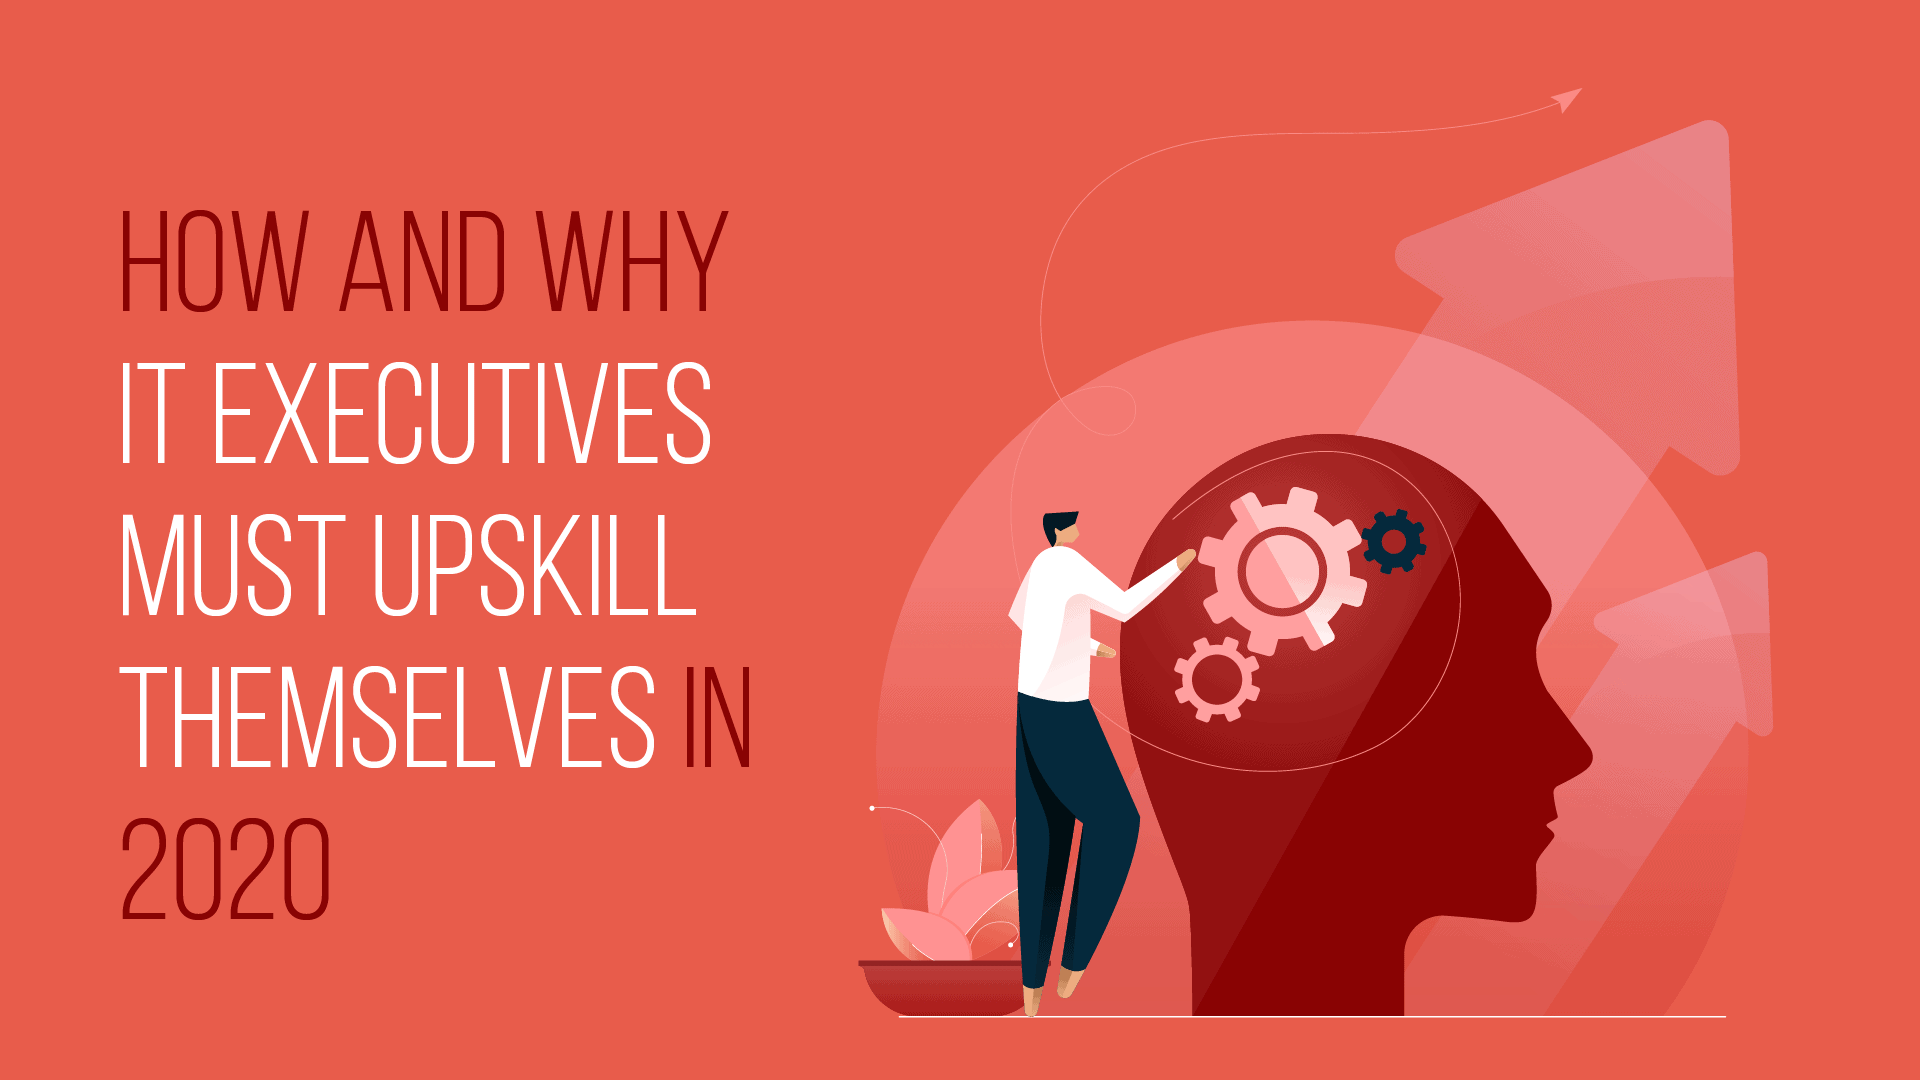 How and Why IT Executives Must Upskill Themselves in 2020